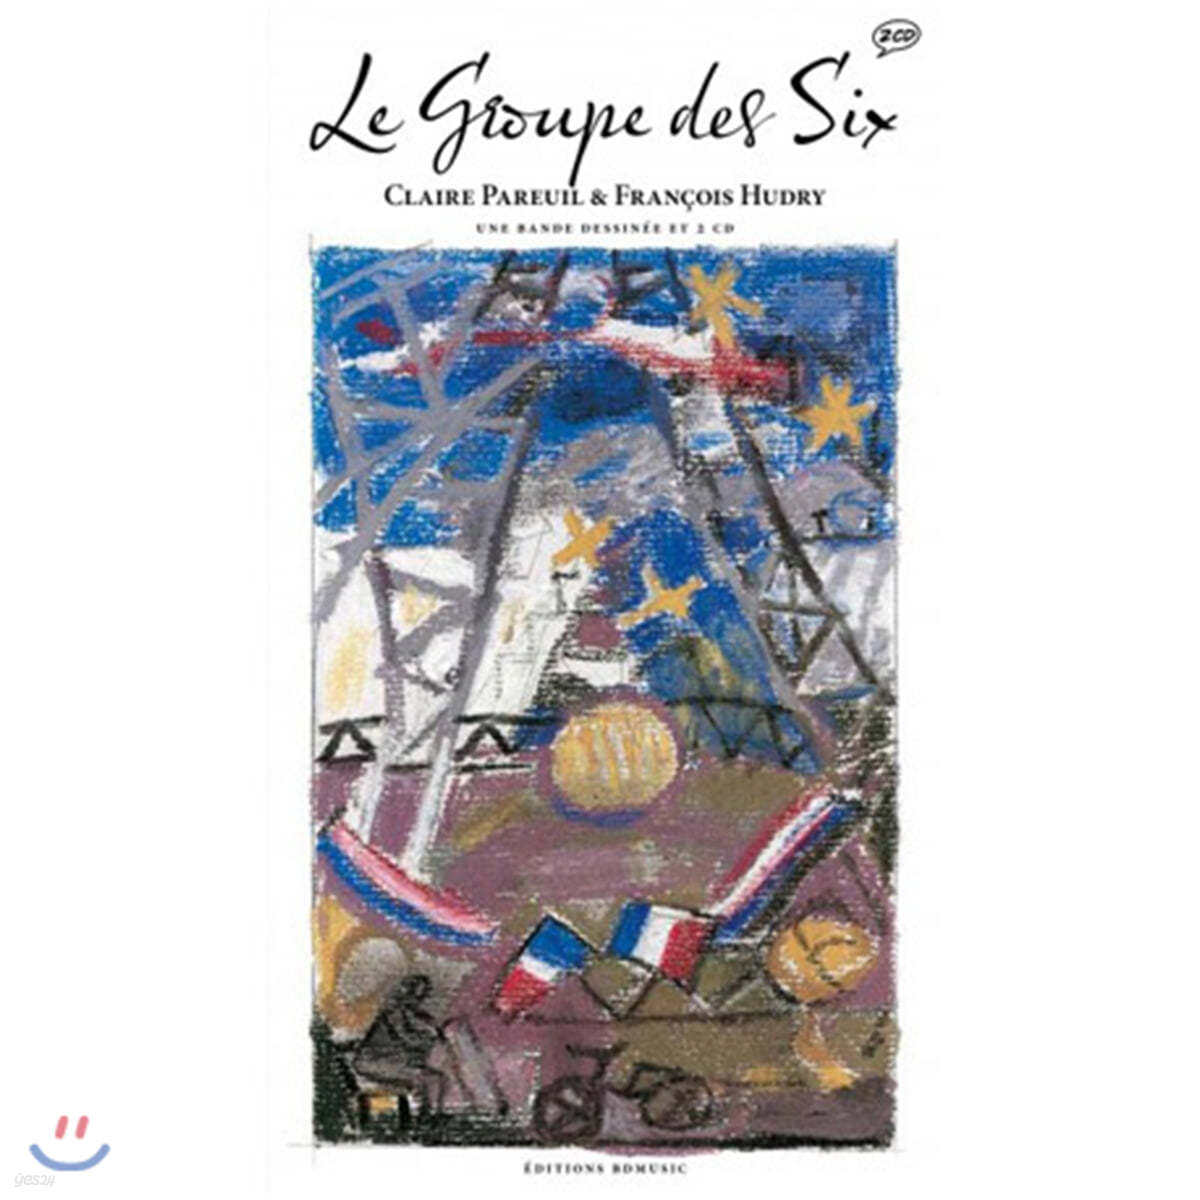 Le Groupe des Six (Illustrated by Claire Pareuil 클레어 파욜)